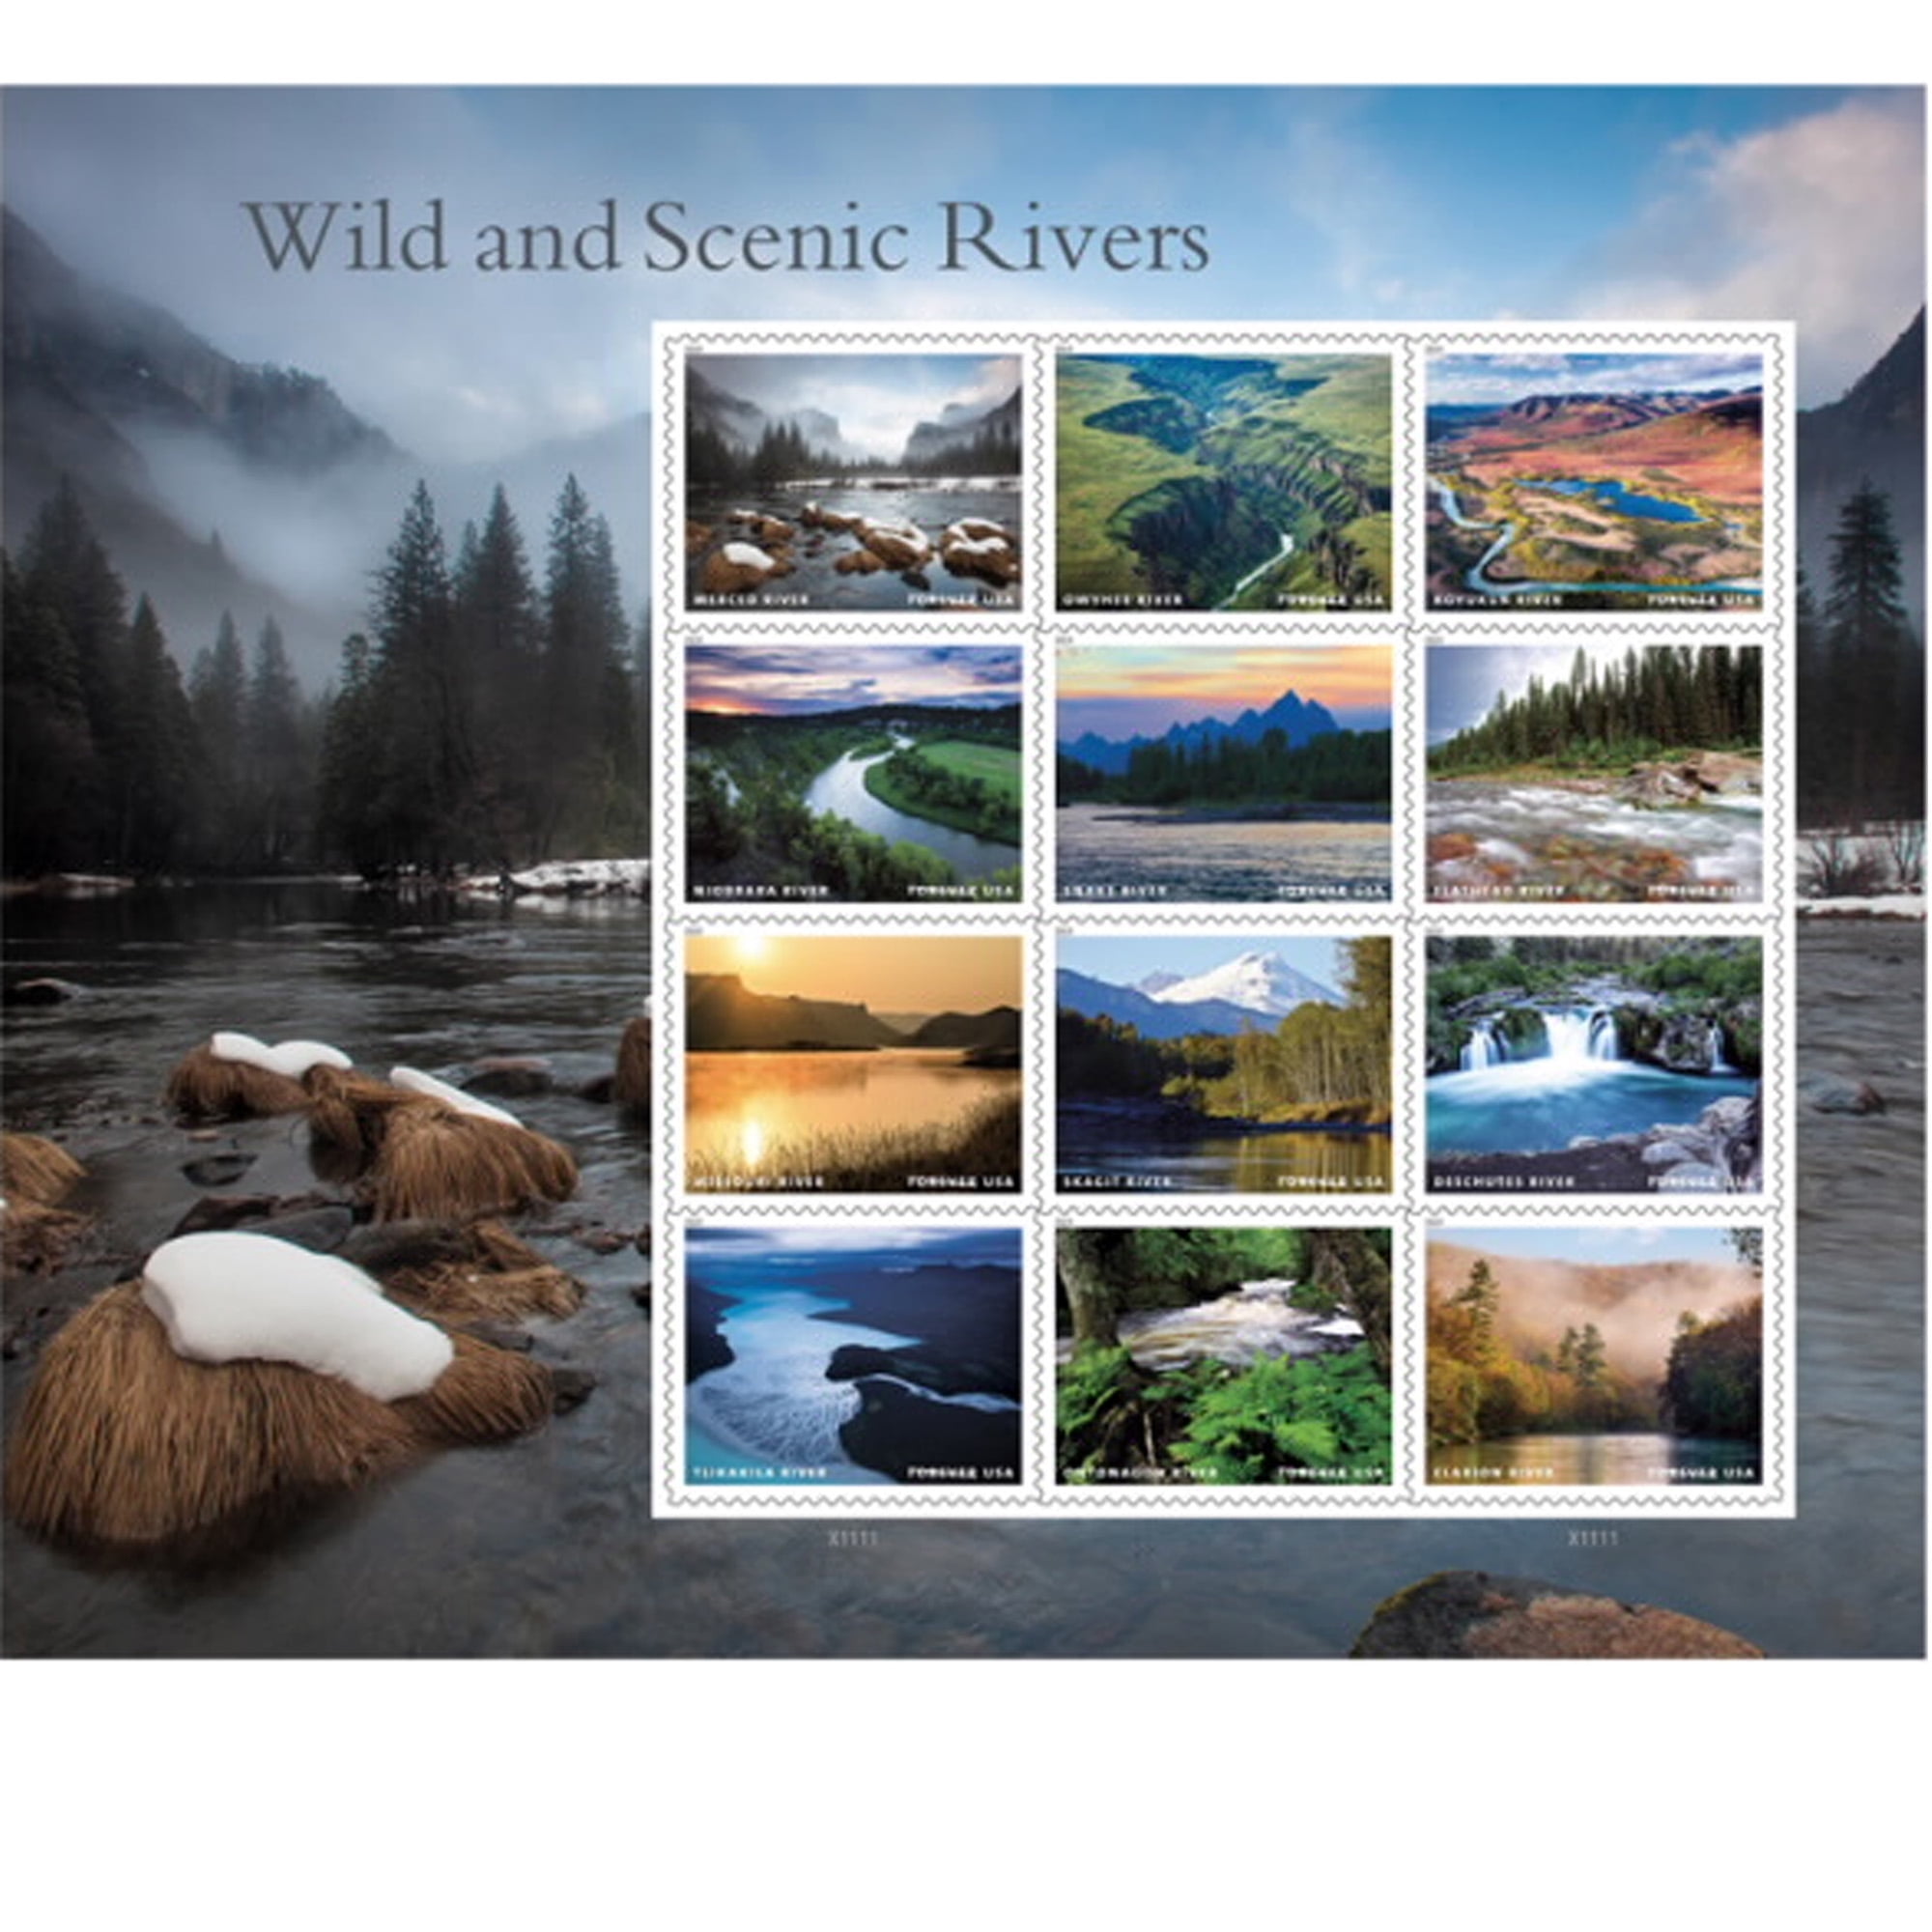 Wild and Scenic Rivers 1 Sheet of 12 USPS First Class Forever Postage Stamps Wedding Celebration (12 Stamps)